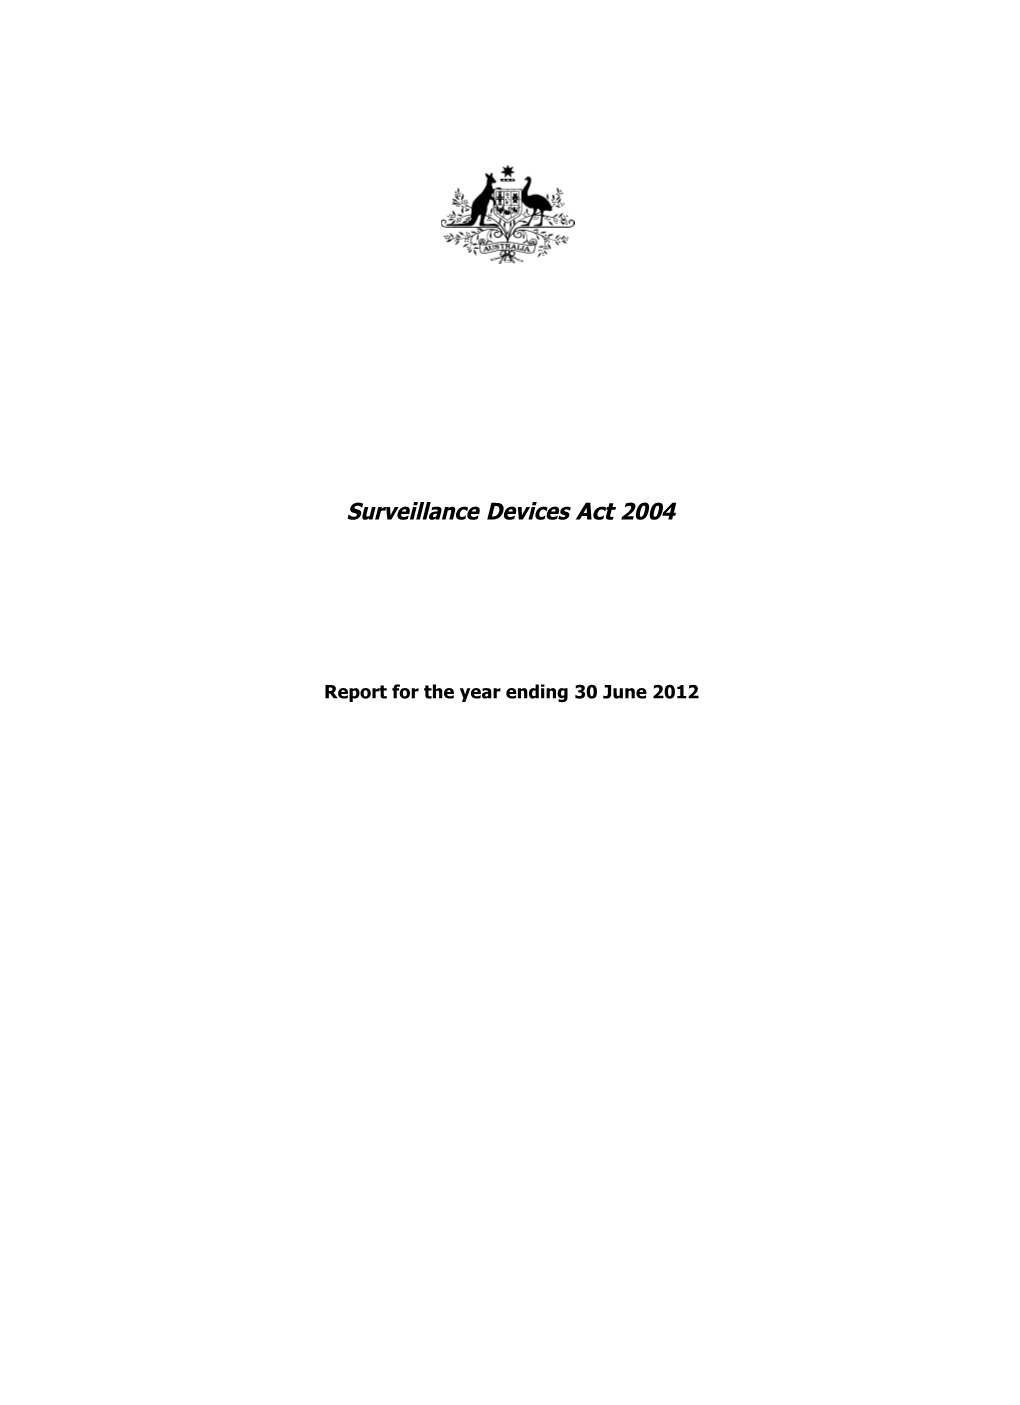 Surveillance Devices Act 2004 - Annual Report for the Year Ending 30 June 2012